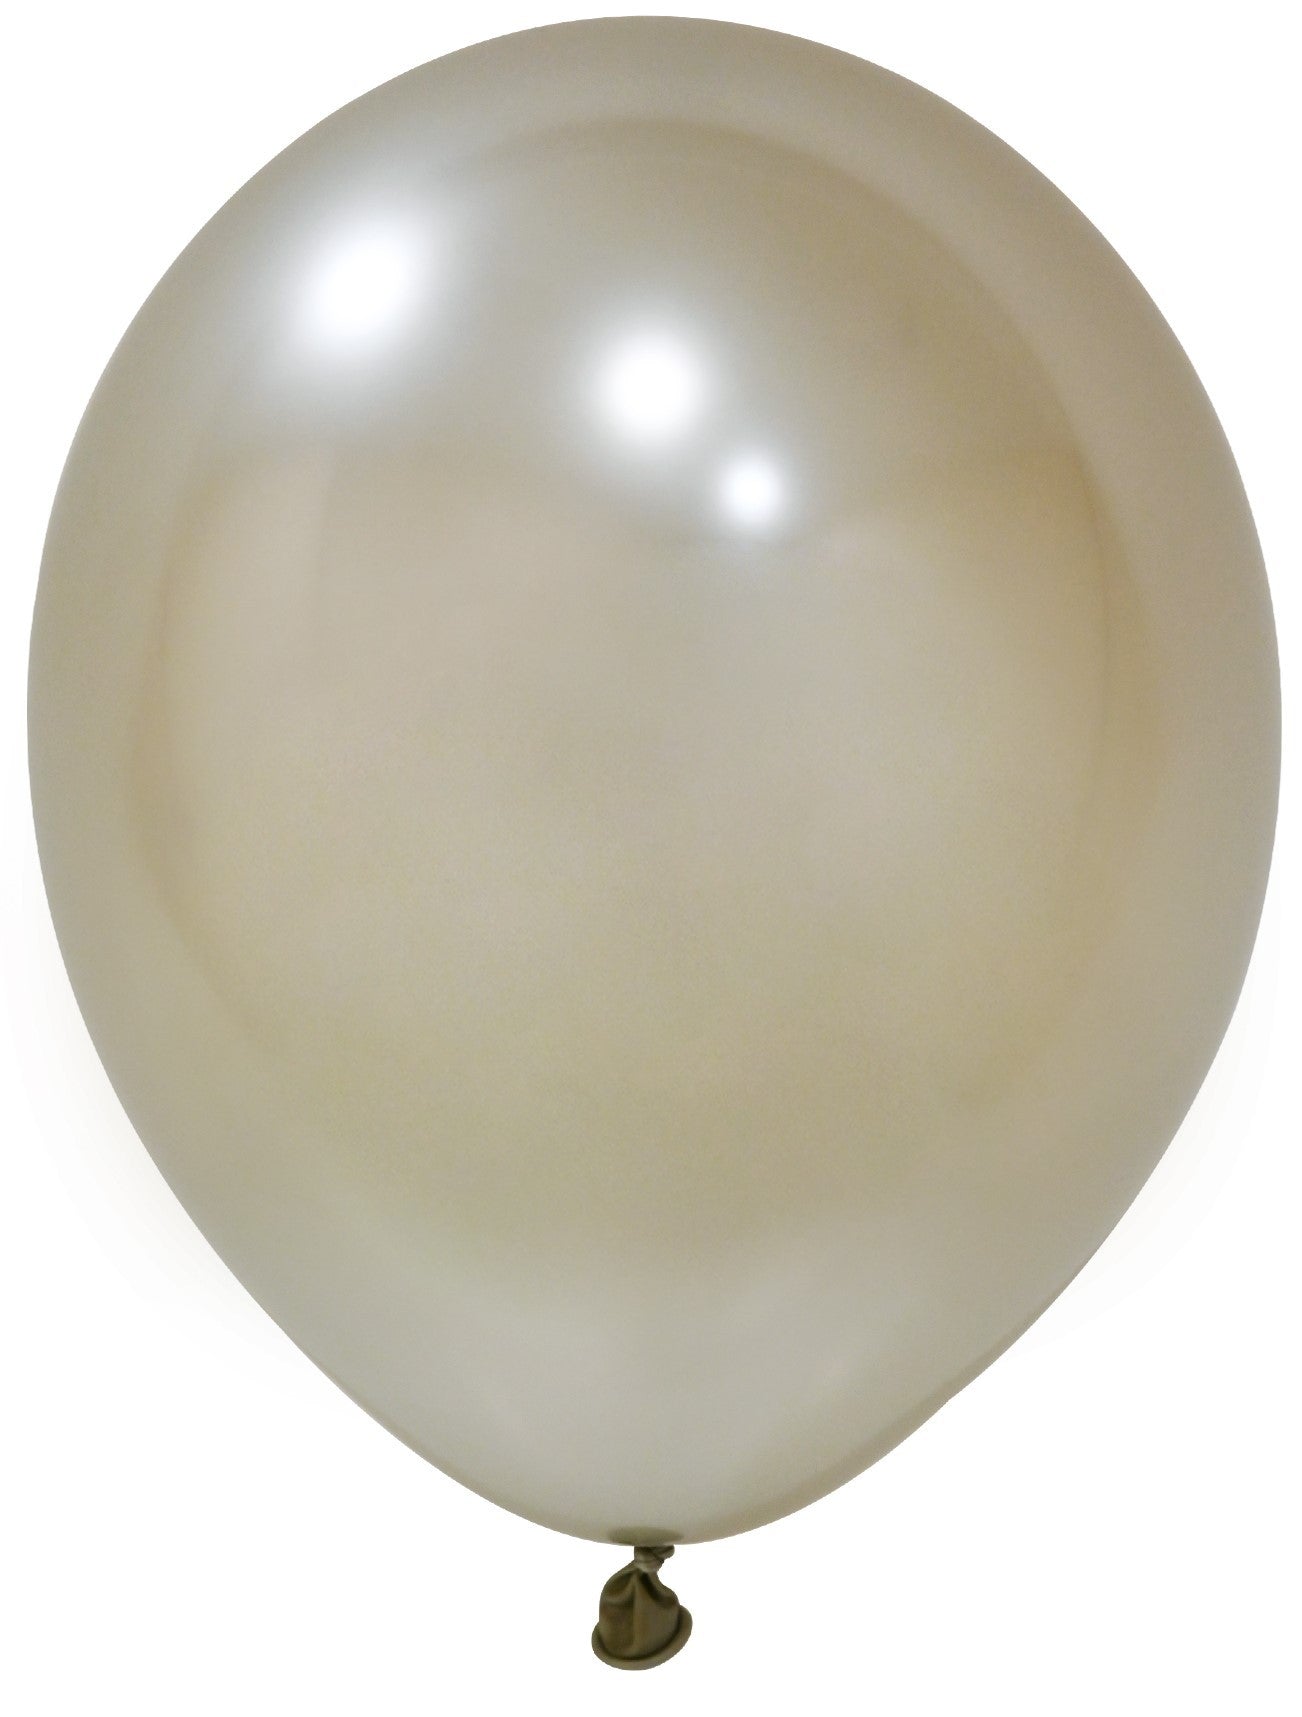 View White Gold Chrome Latex Balloon 10inch Pack of 50 information